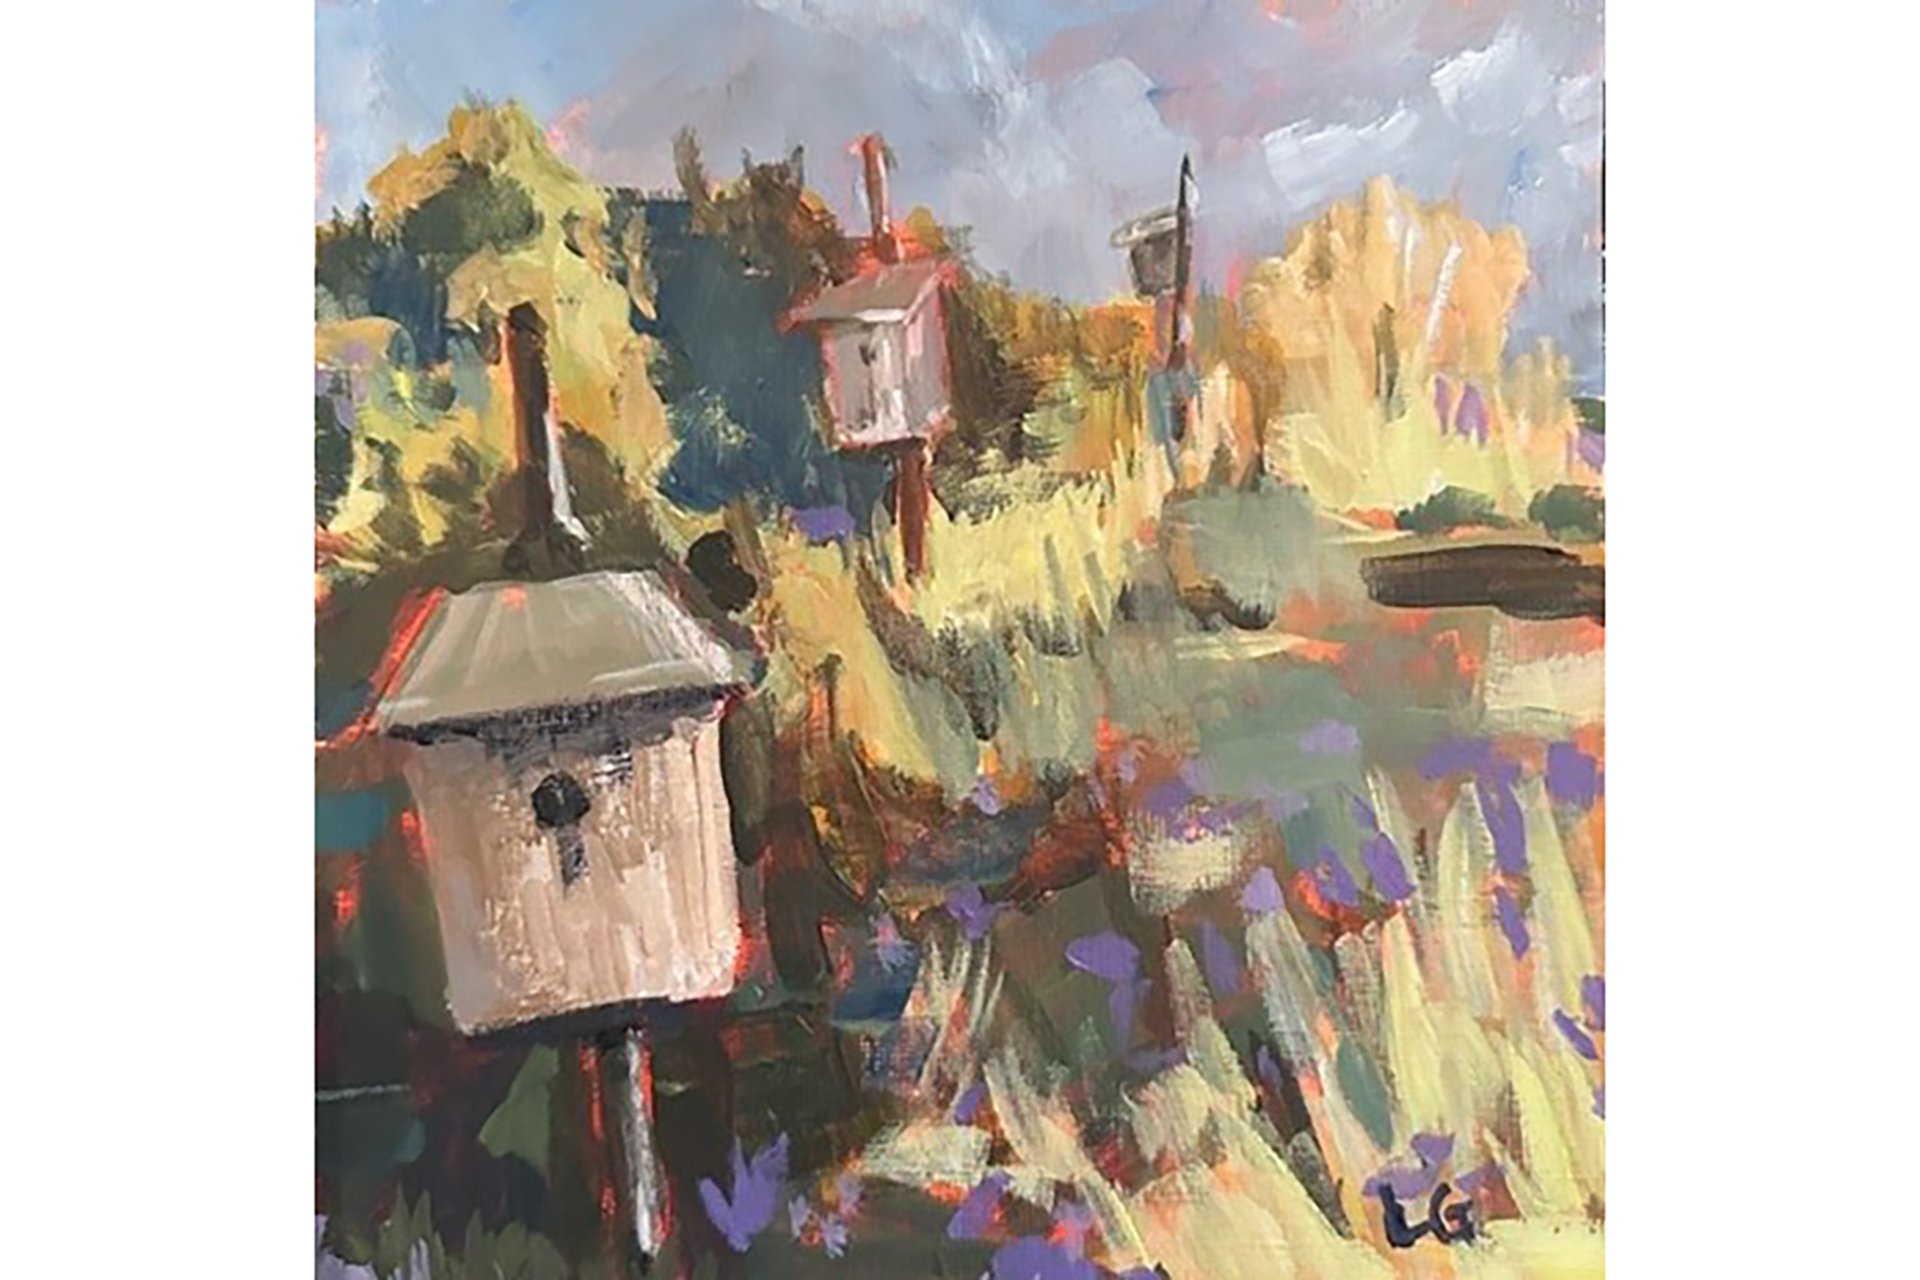 painting of birdhouses among tall grass